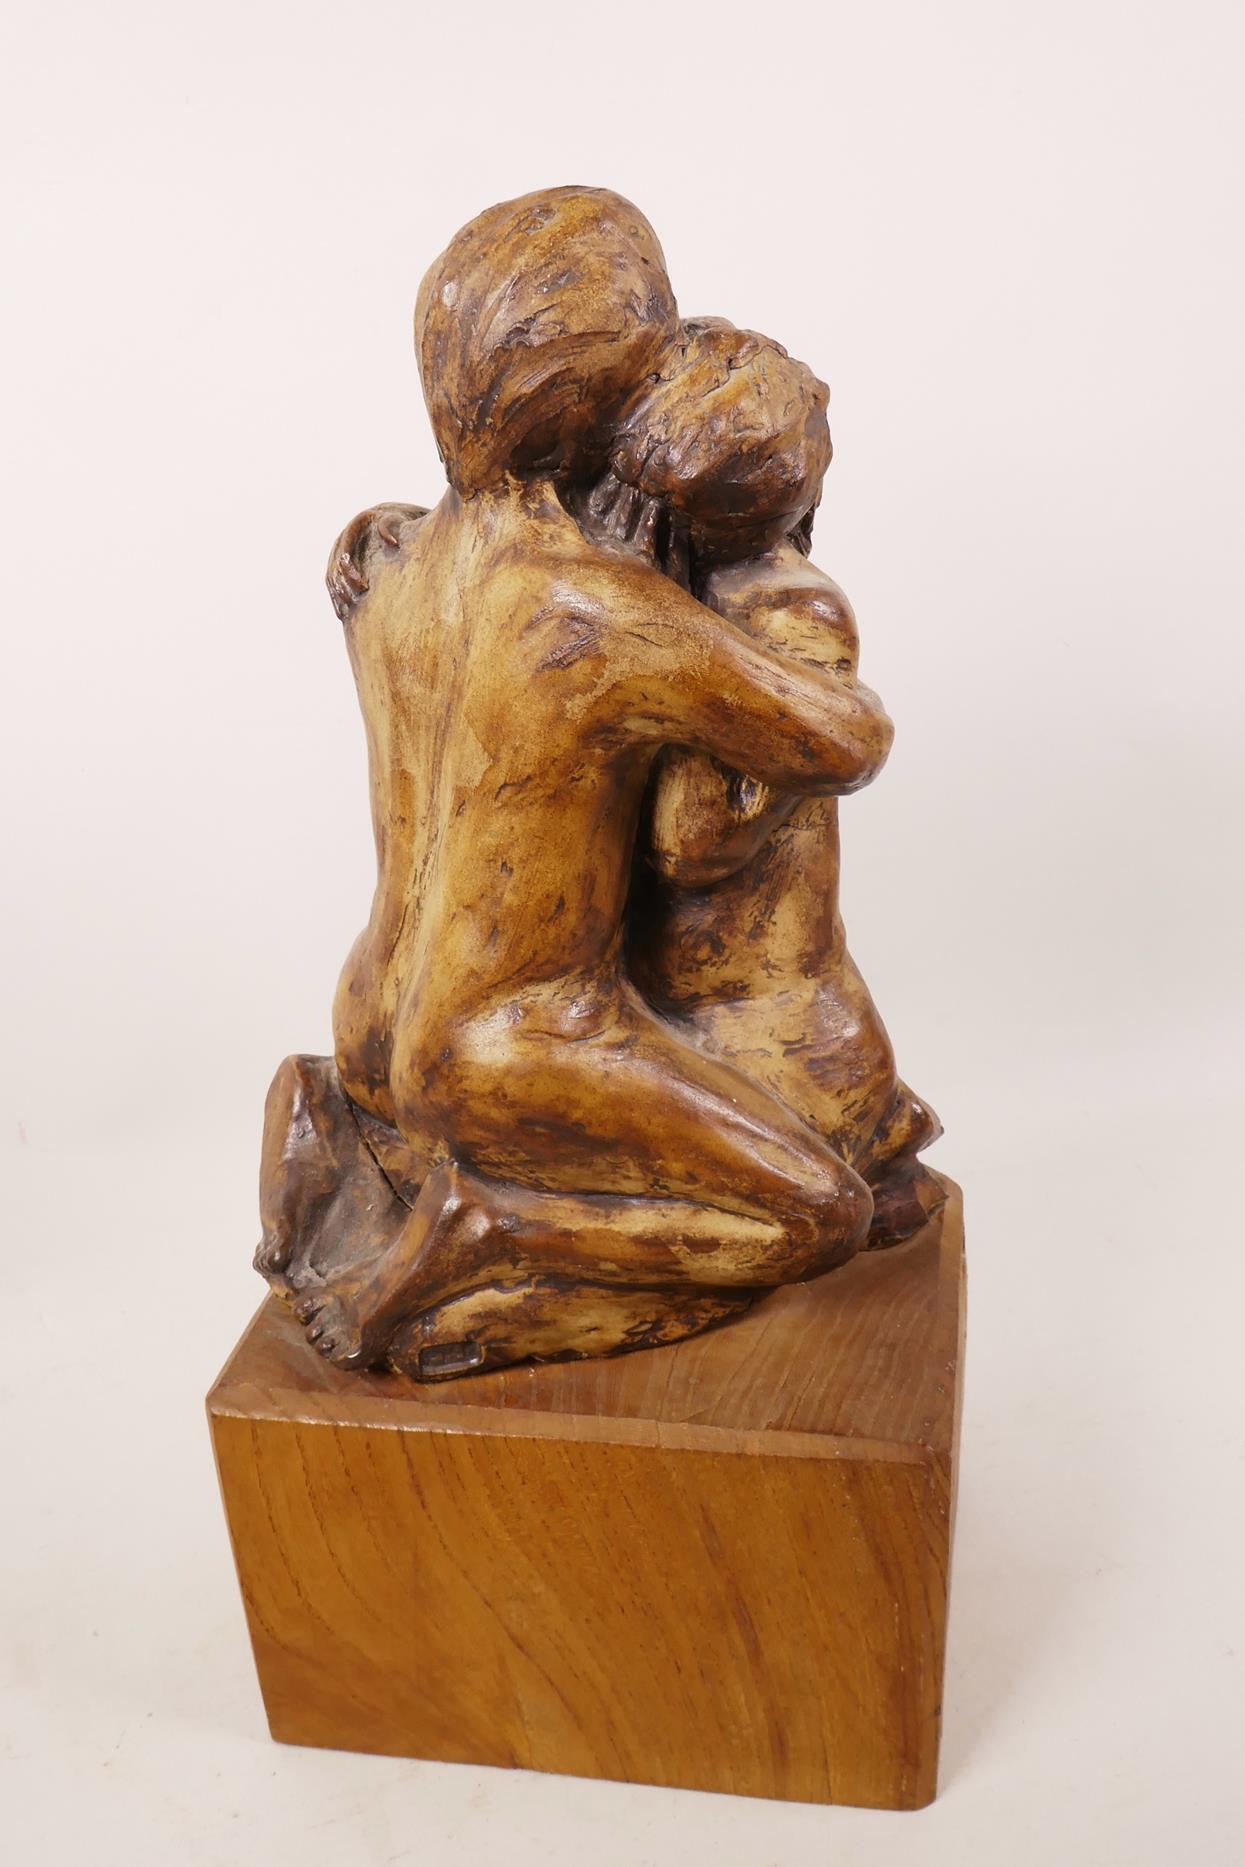 An art pottery figurine of a lovers' embrace mounted on a wooden plinth, 13½" high - Image 2 of 3